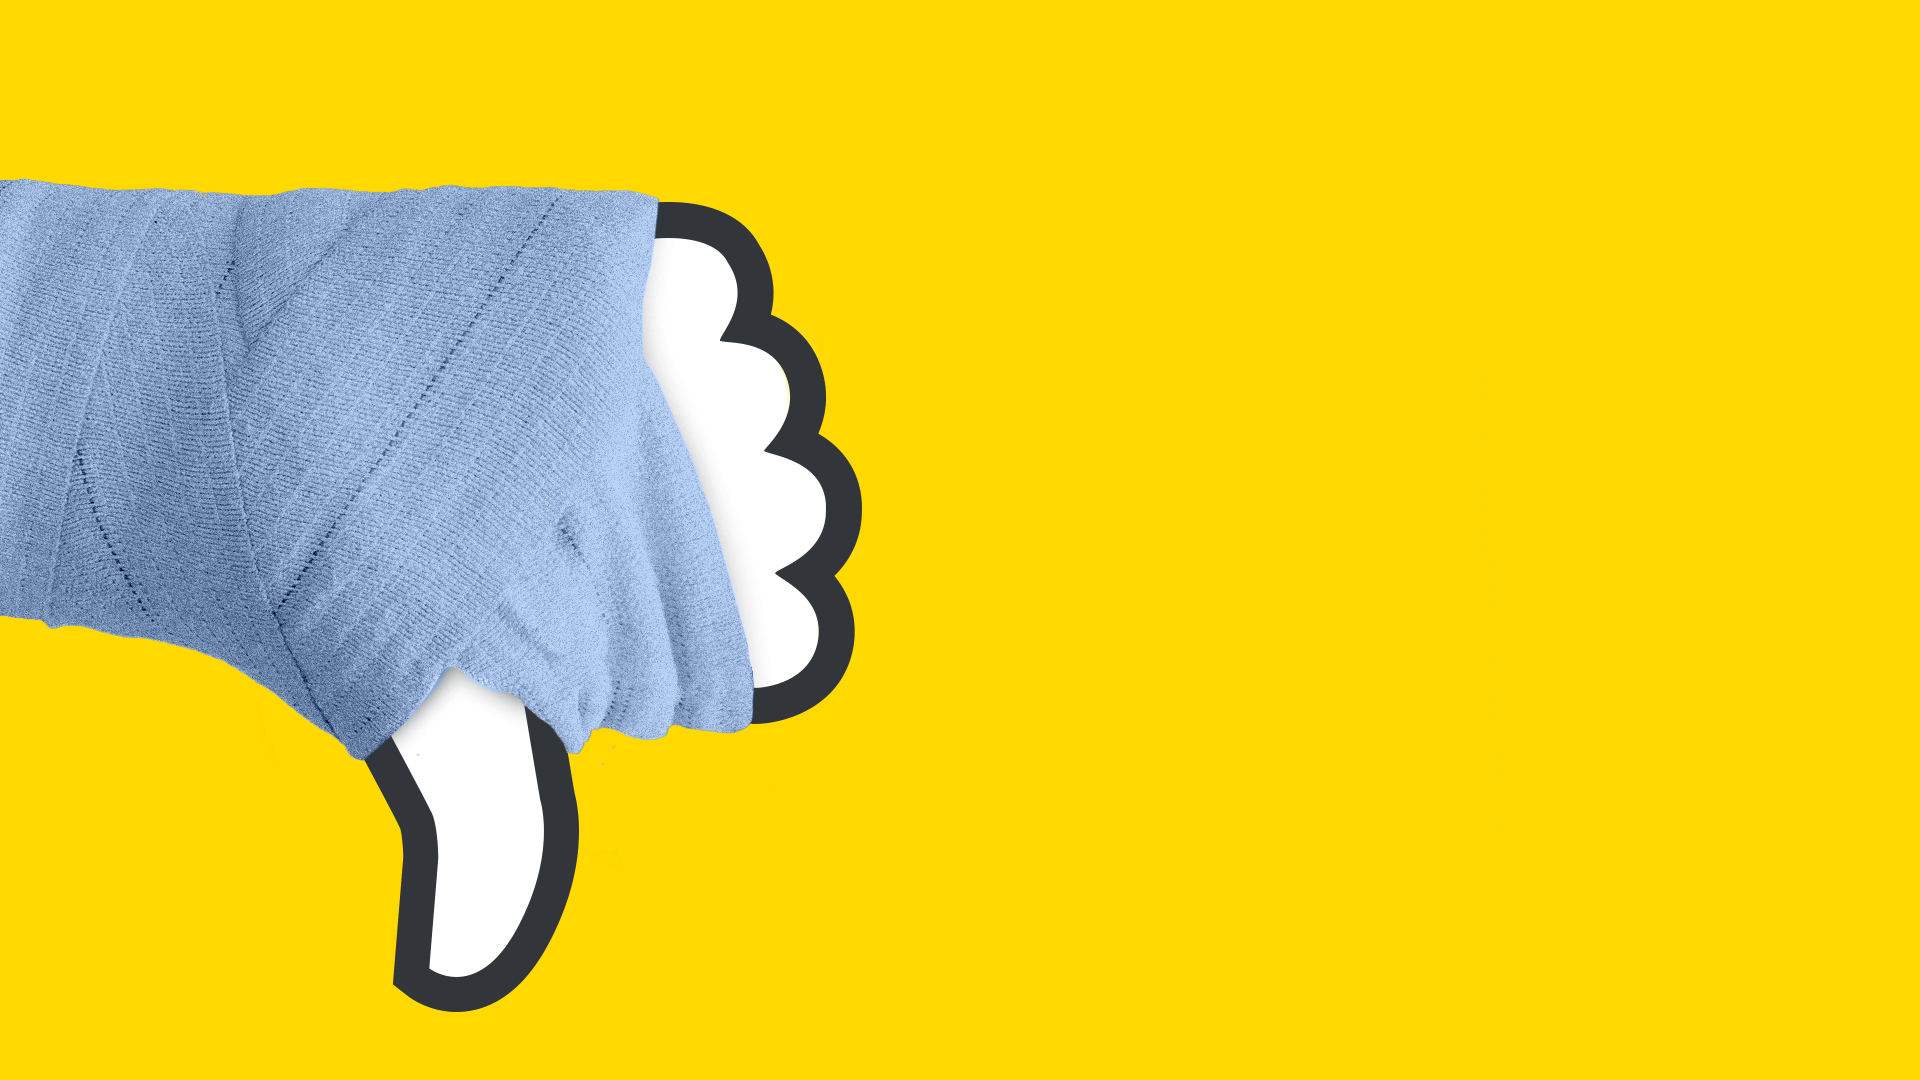 Illustration of Facebook thumbs up turned upside down and bandaged 